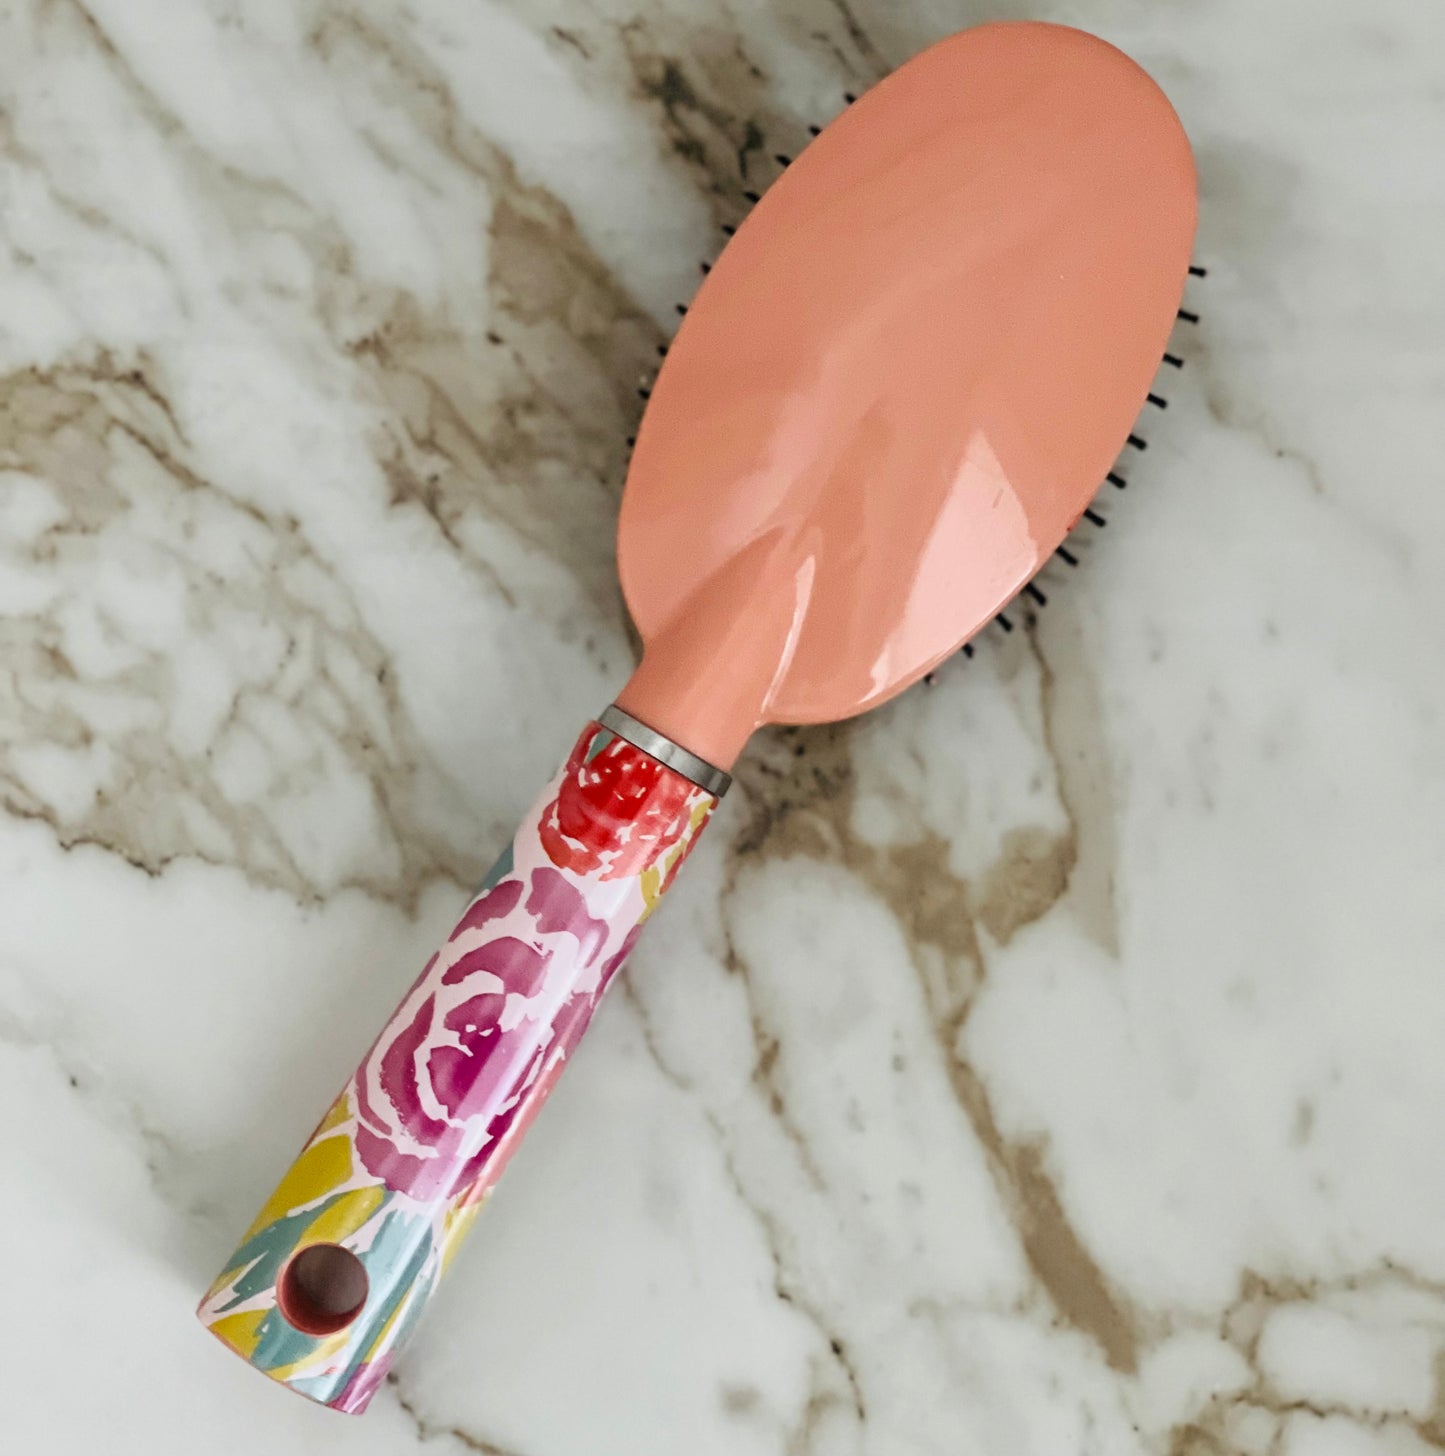 What's more beautiful than a floral brush? How about one that's personalized with your name! When you're searching for the perfect hairbrush, look no further than this custom personalized hair brush. This oval hairbrush is crafted with the highest quality materials and designed to last. We know you'll love using it every day - it feels amazing on your hair and leaves it looking voluminous and luxurious. Plus, with its chic floral design, it is also chic. Peach